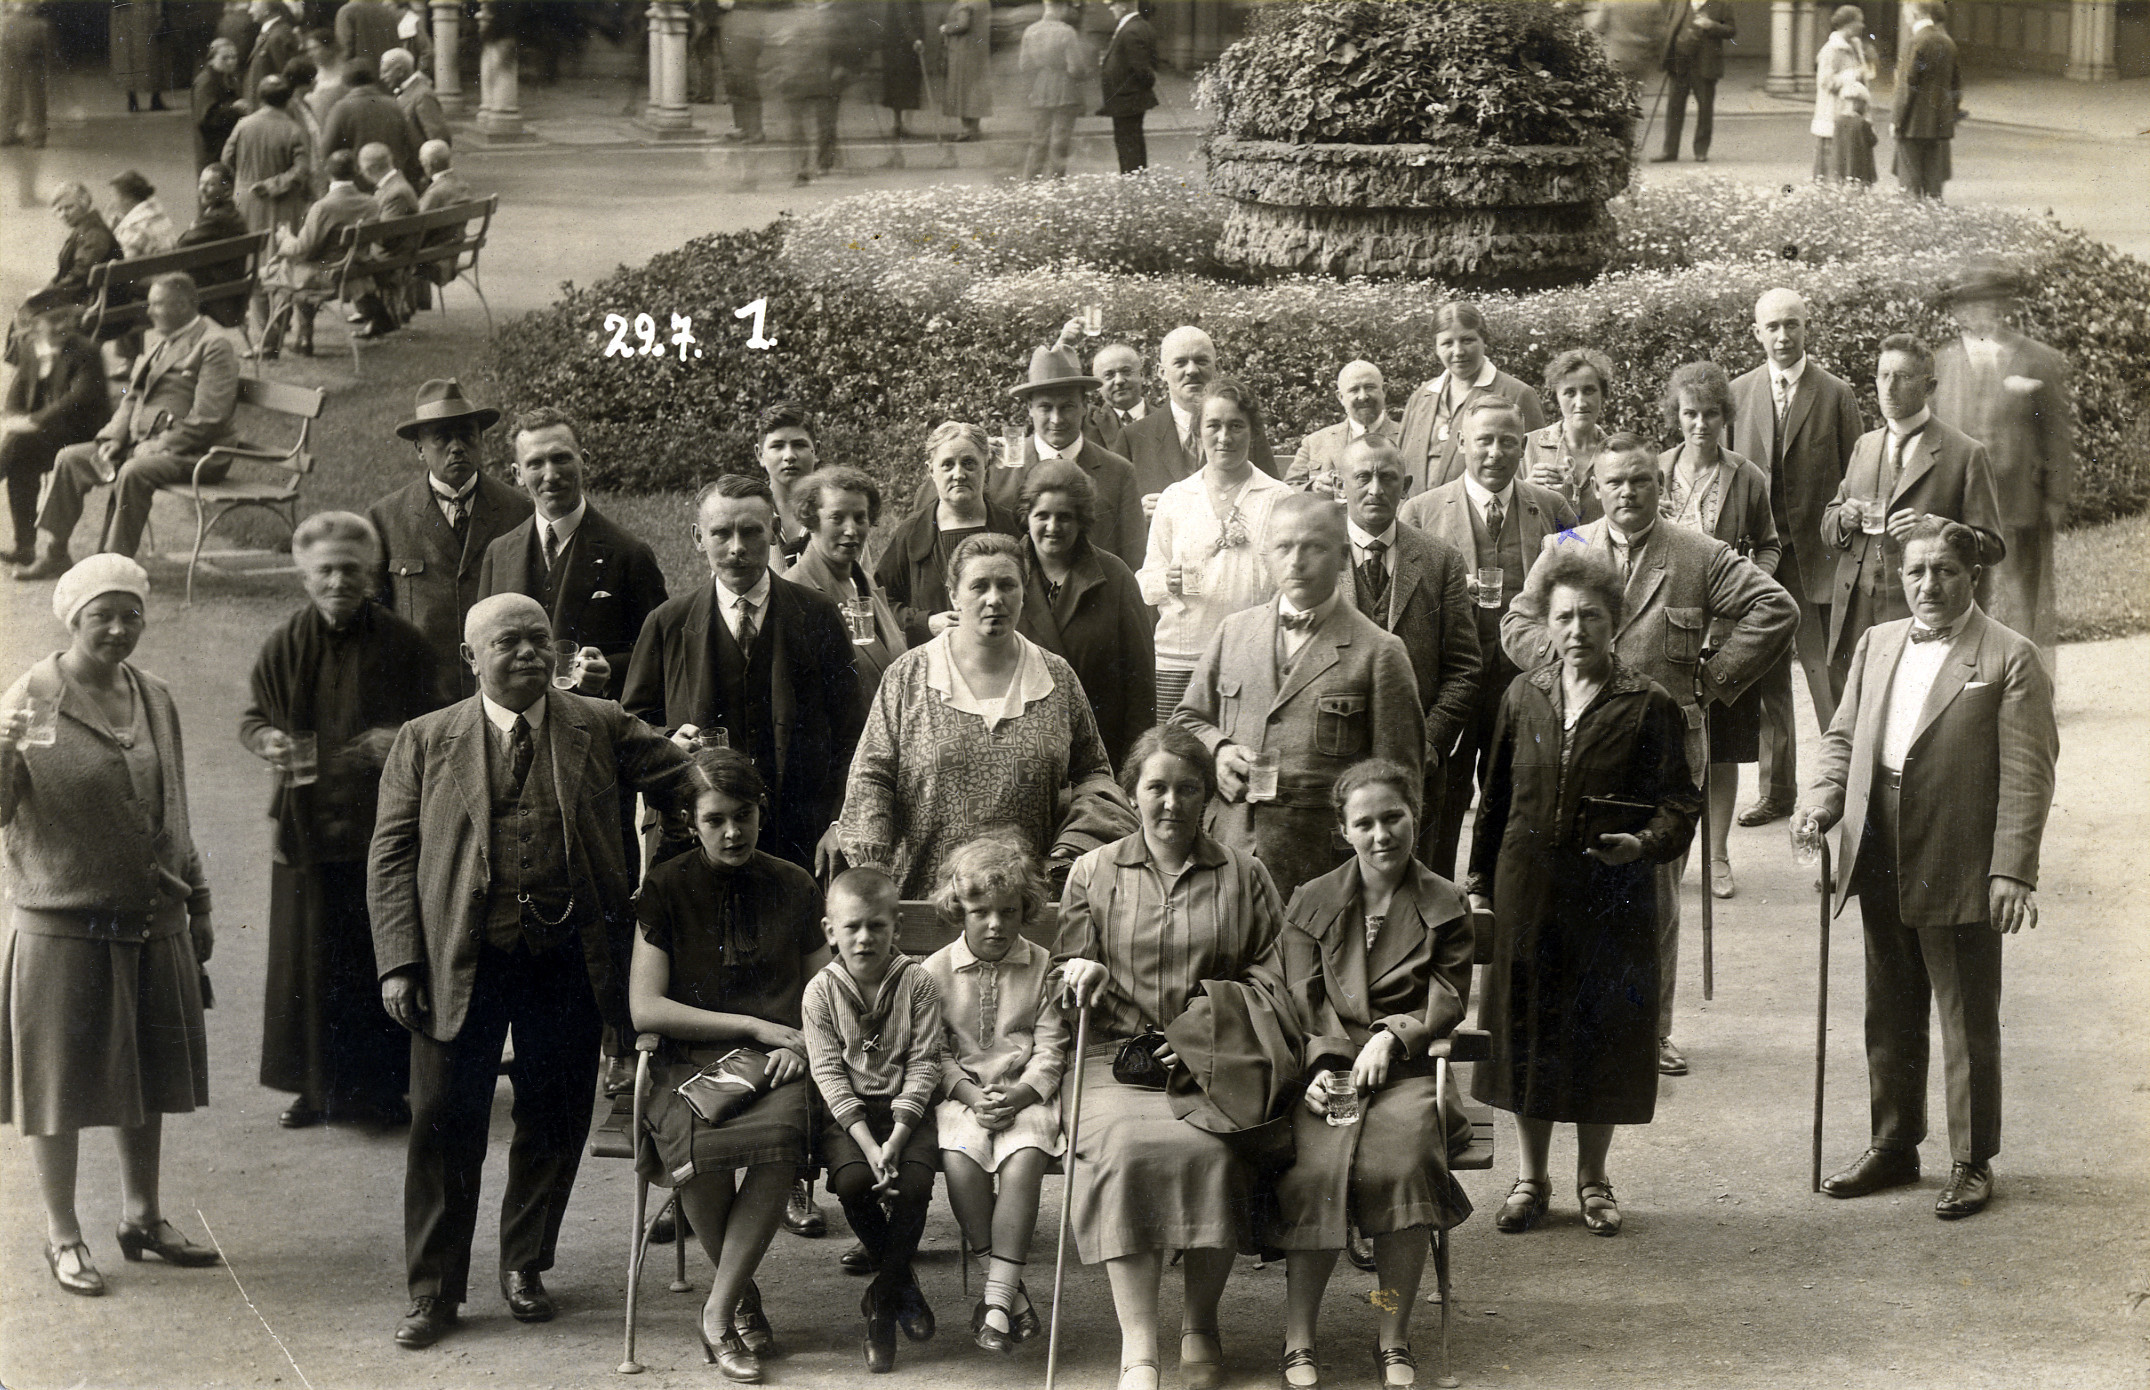 Group portrait of attendees at the Congress Hazioni.

Among those pictured is Gustava Solnik (wearing dark dress, on the right), who taught for forty years in the Jewish elementary school in Kalisz.